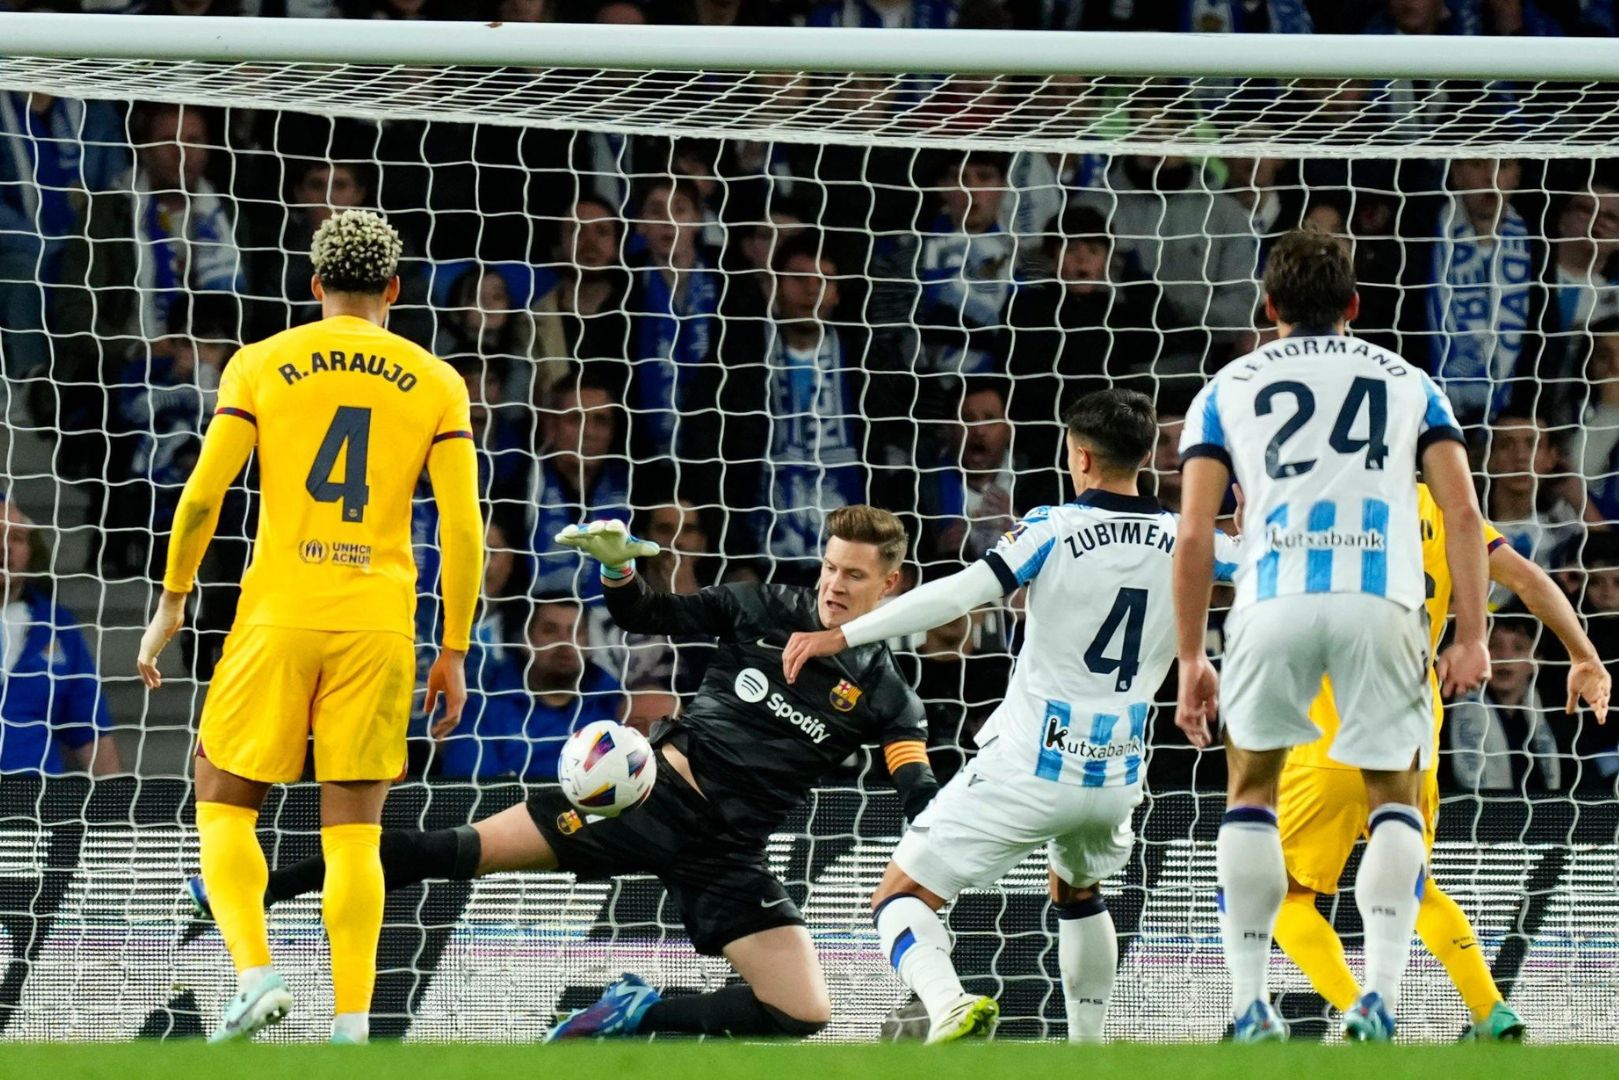 Marc-Andre ter Stegen goalkeeper of Barcelona and Germany makes a save during the LaLiga EA Sports match between Real Sociedad and FC Barcelona at Reale Arena on November 4, 2023 in San Sebastian, Spain.